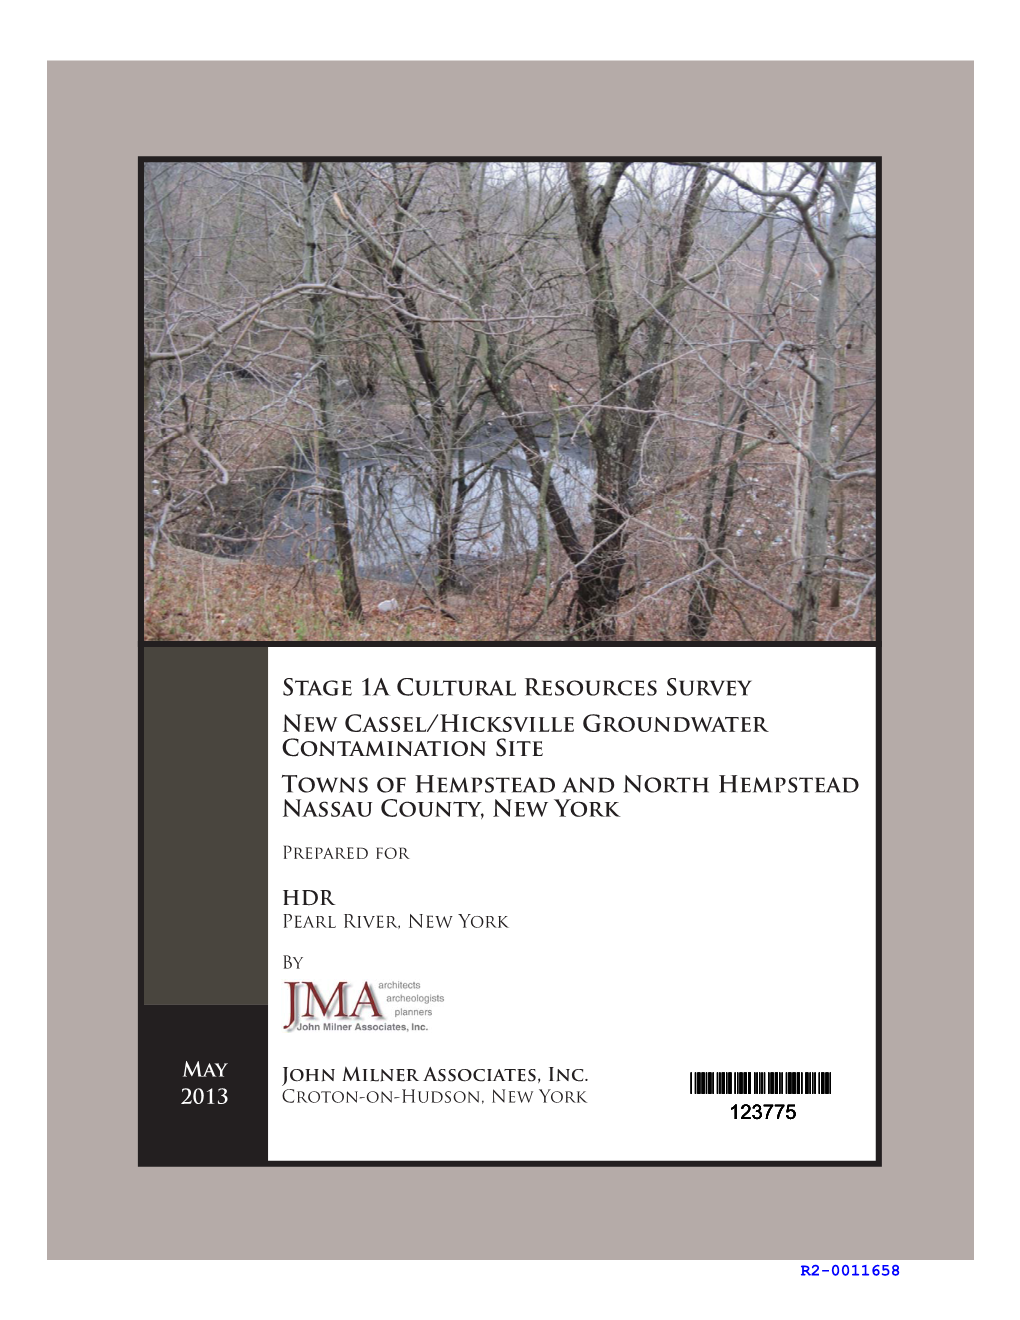 Stage 1A Cultural Resources Survey New Cassel/Hicksville Groundwater Contamination Site Towns of Hempstead and North Hempstead Nassau County, New York